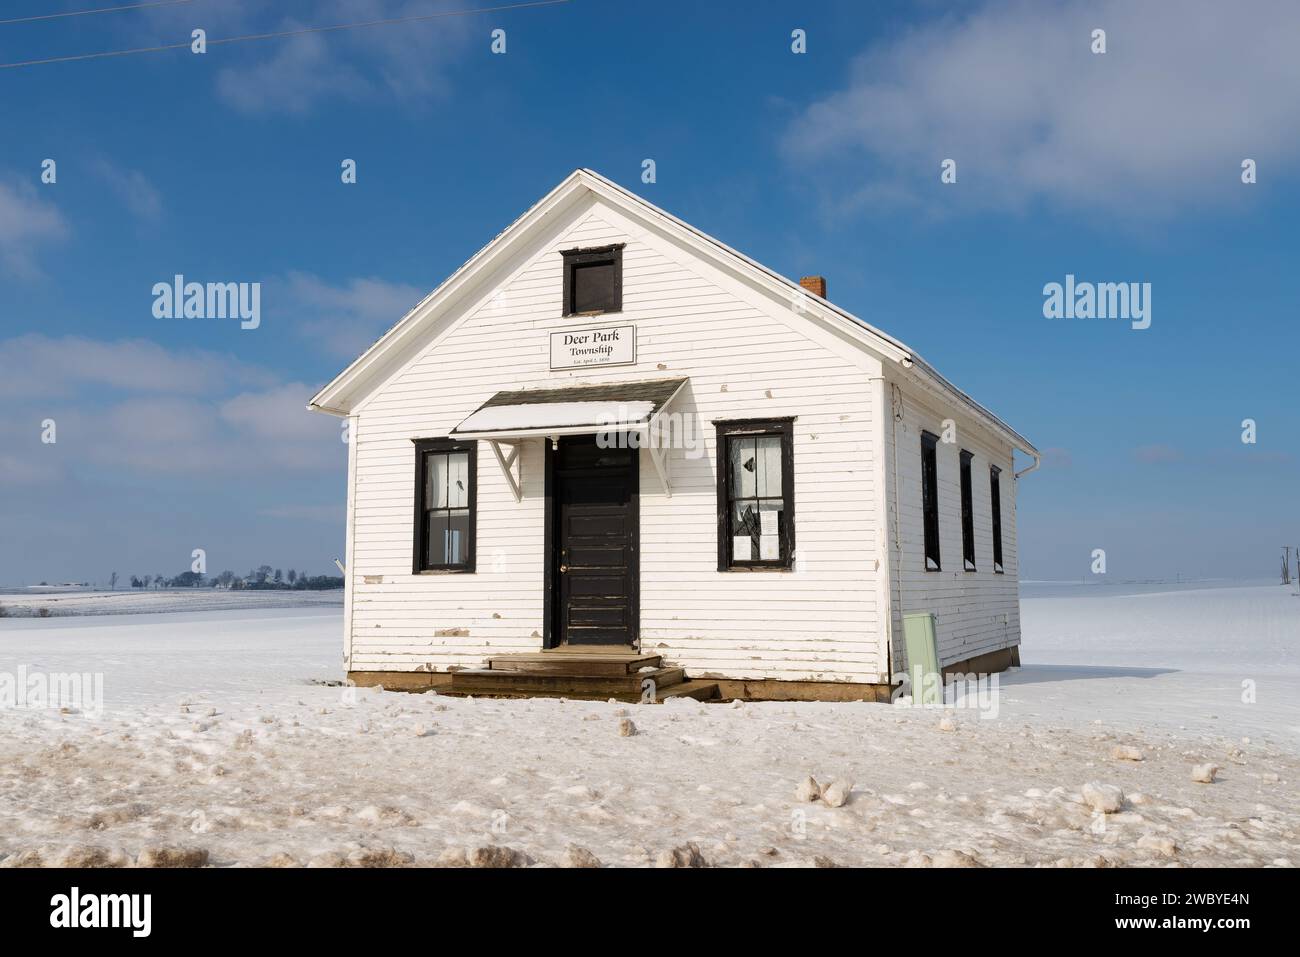 Old one-room schoolhouse in Deer Park Township, Illinois, USA. Stock Photo